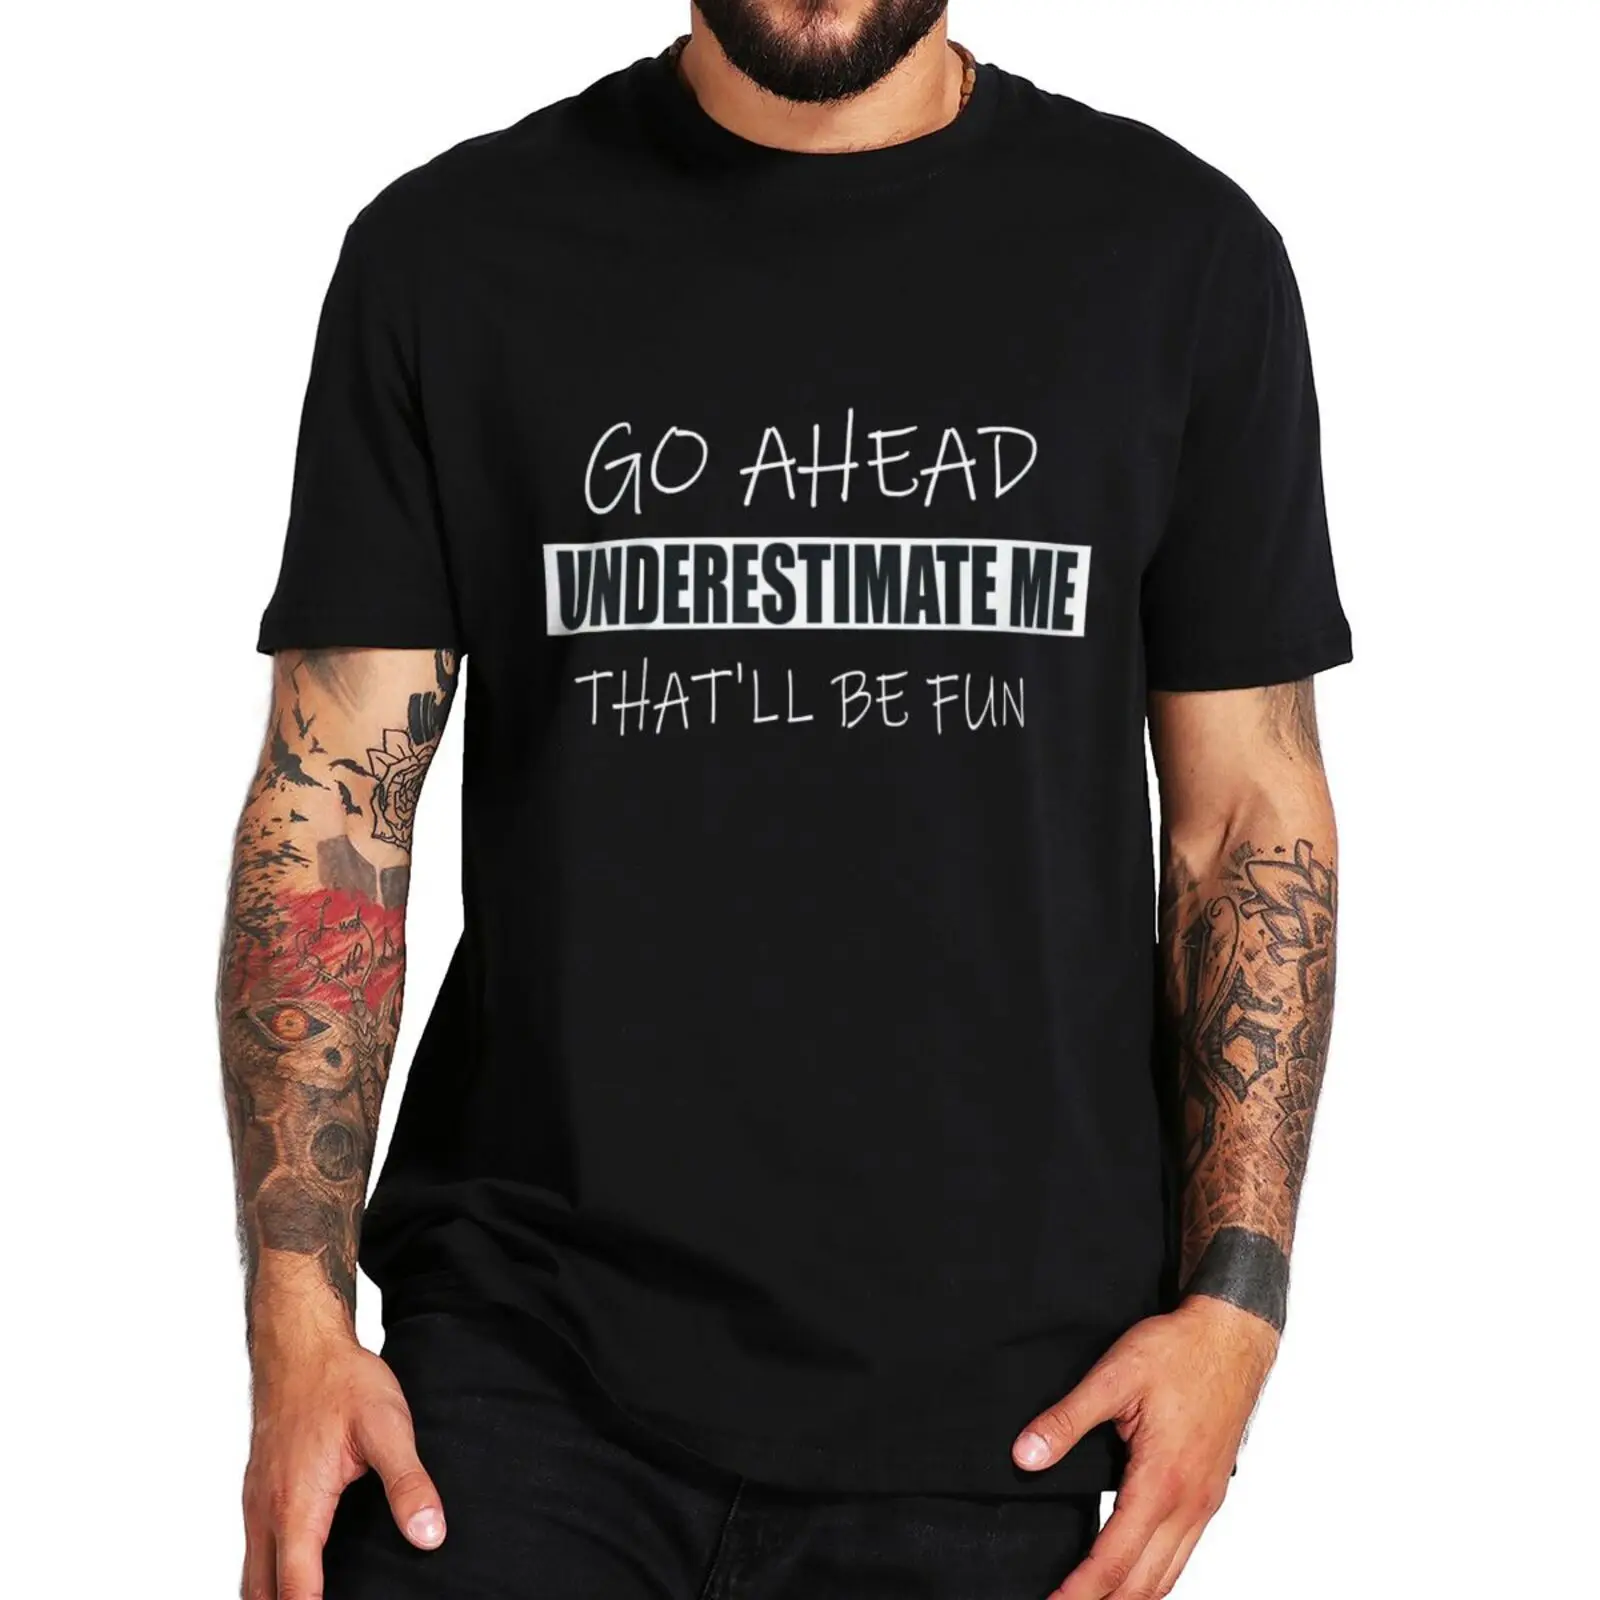 

Go Ahead Underestimate Me That'll Be Fun T Shirt Funny Quotes Fans Saying Tee Tops Summer Cotton EU Size Soft Unisex T-shirt